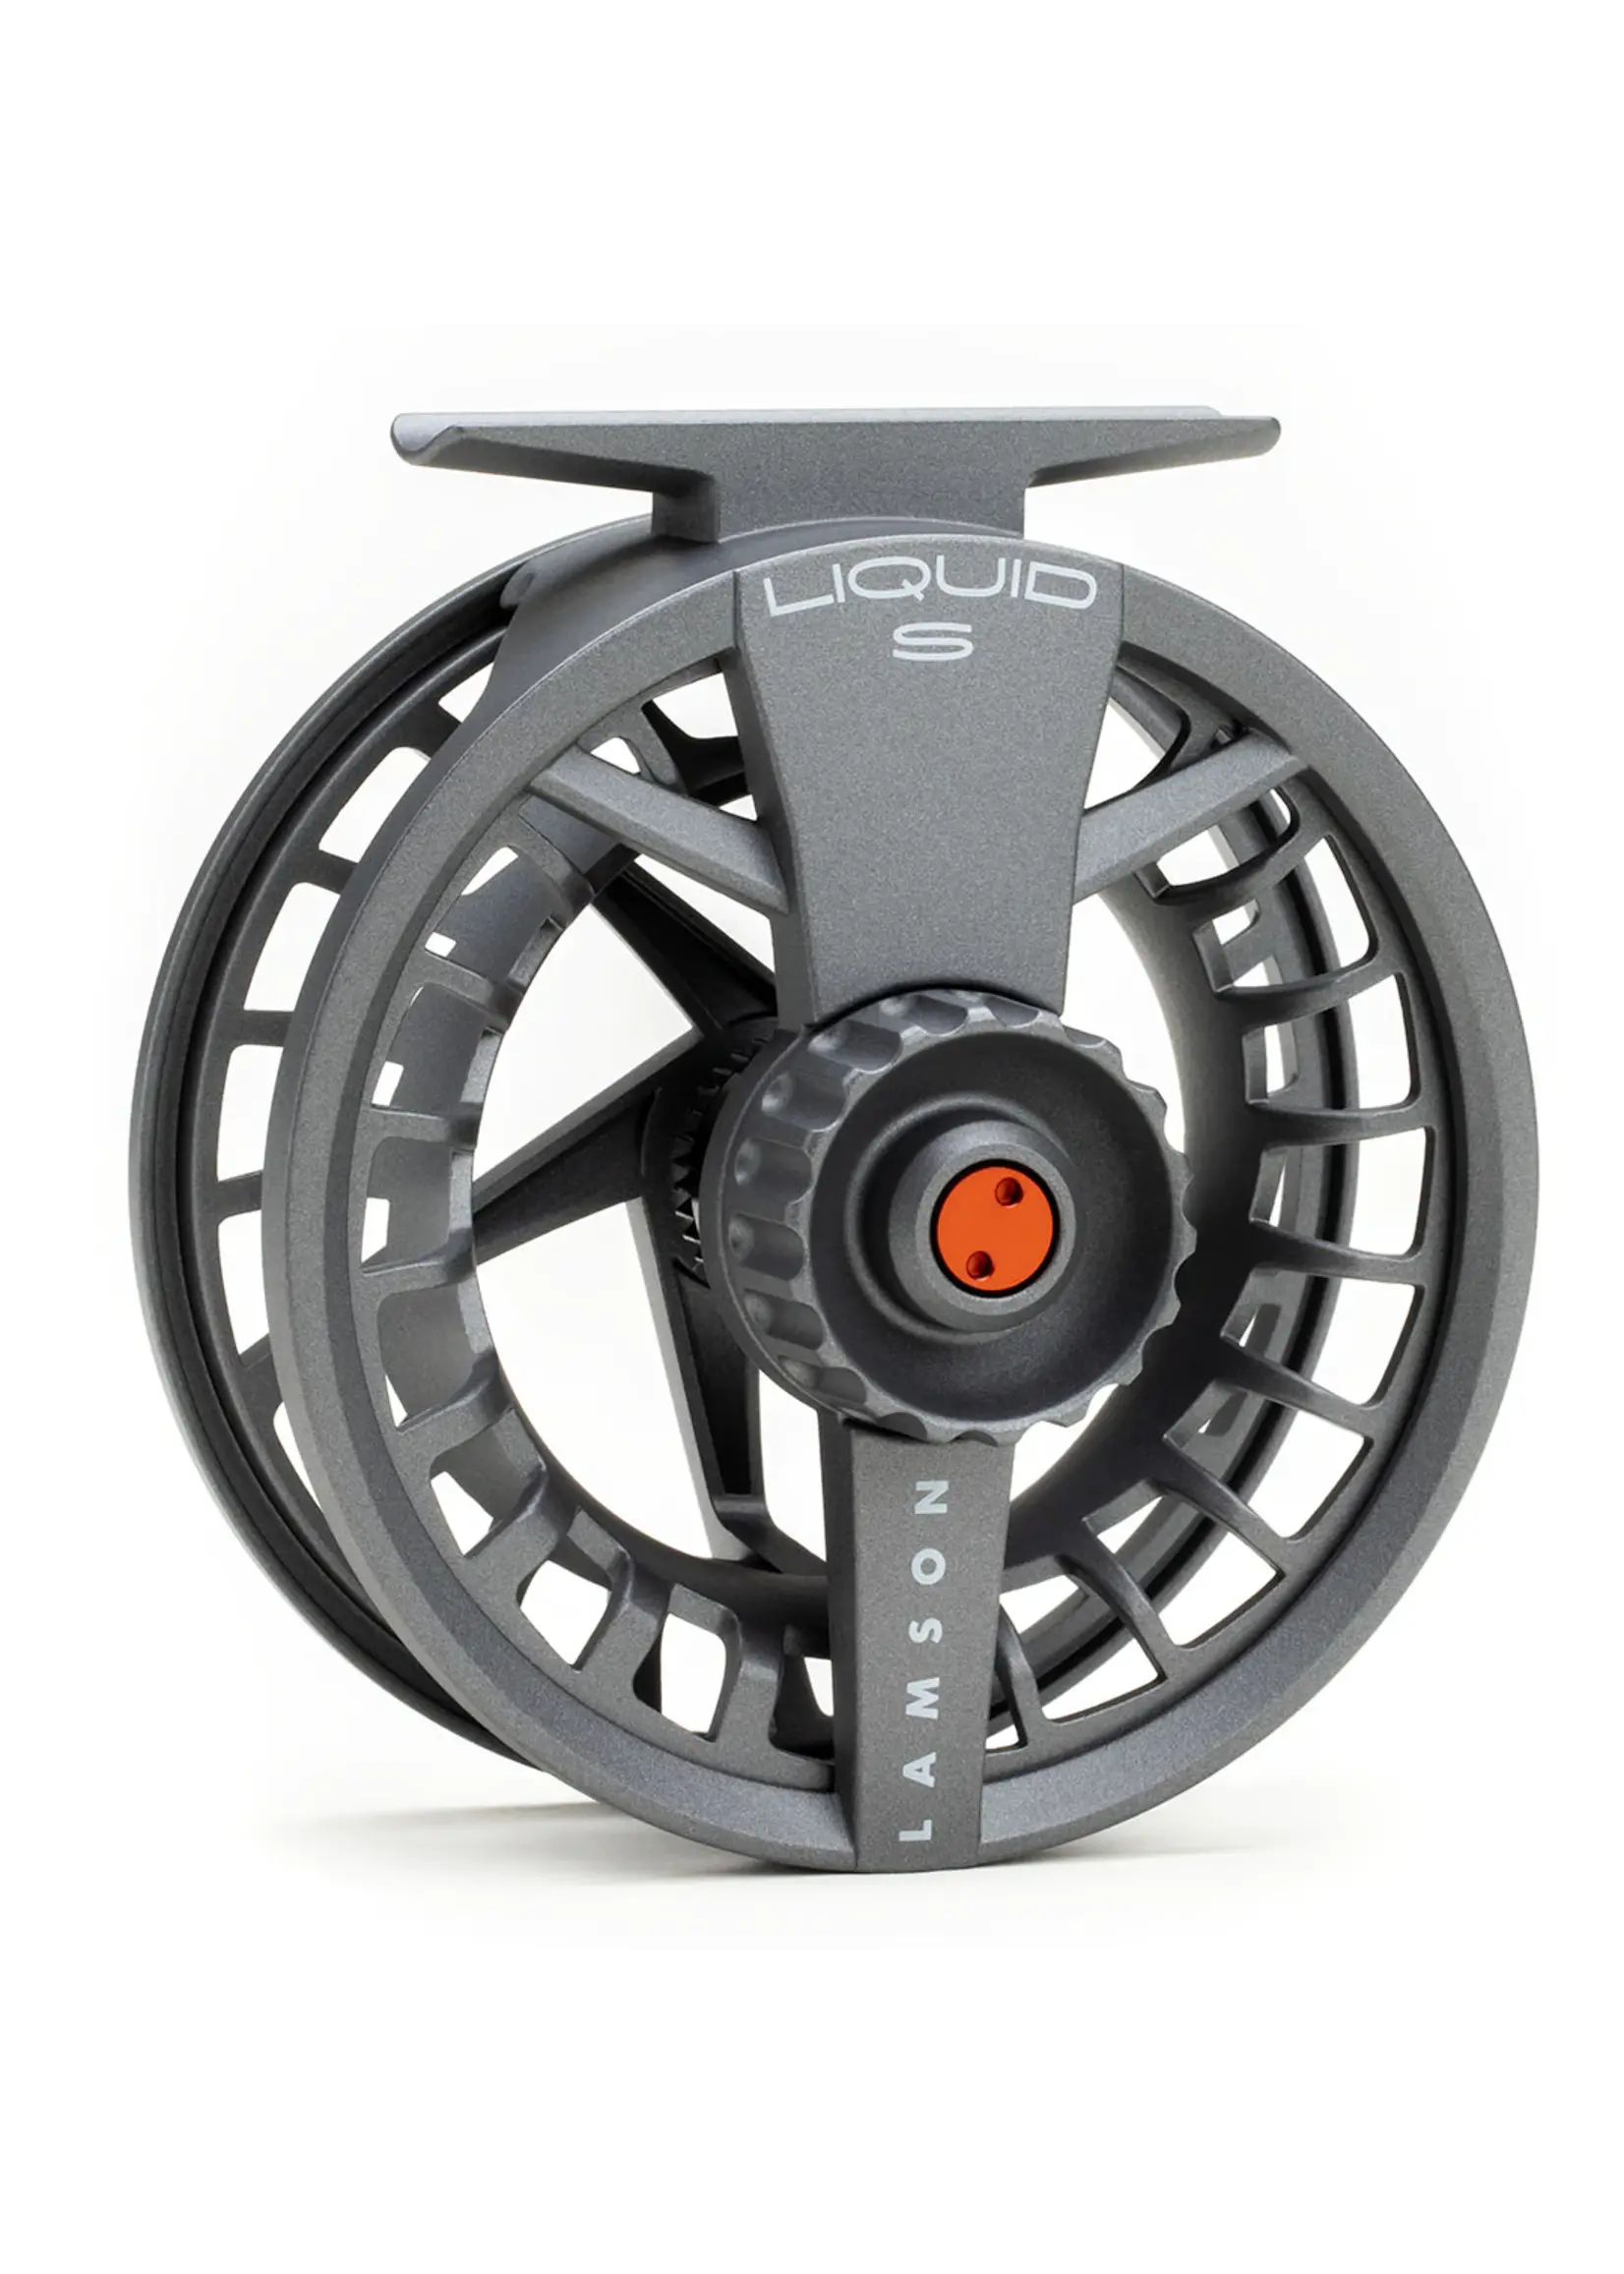 Waterworks-Lamson Lamson Liquid Outfit W/ Fly Line, Leader, and Backing